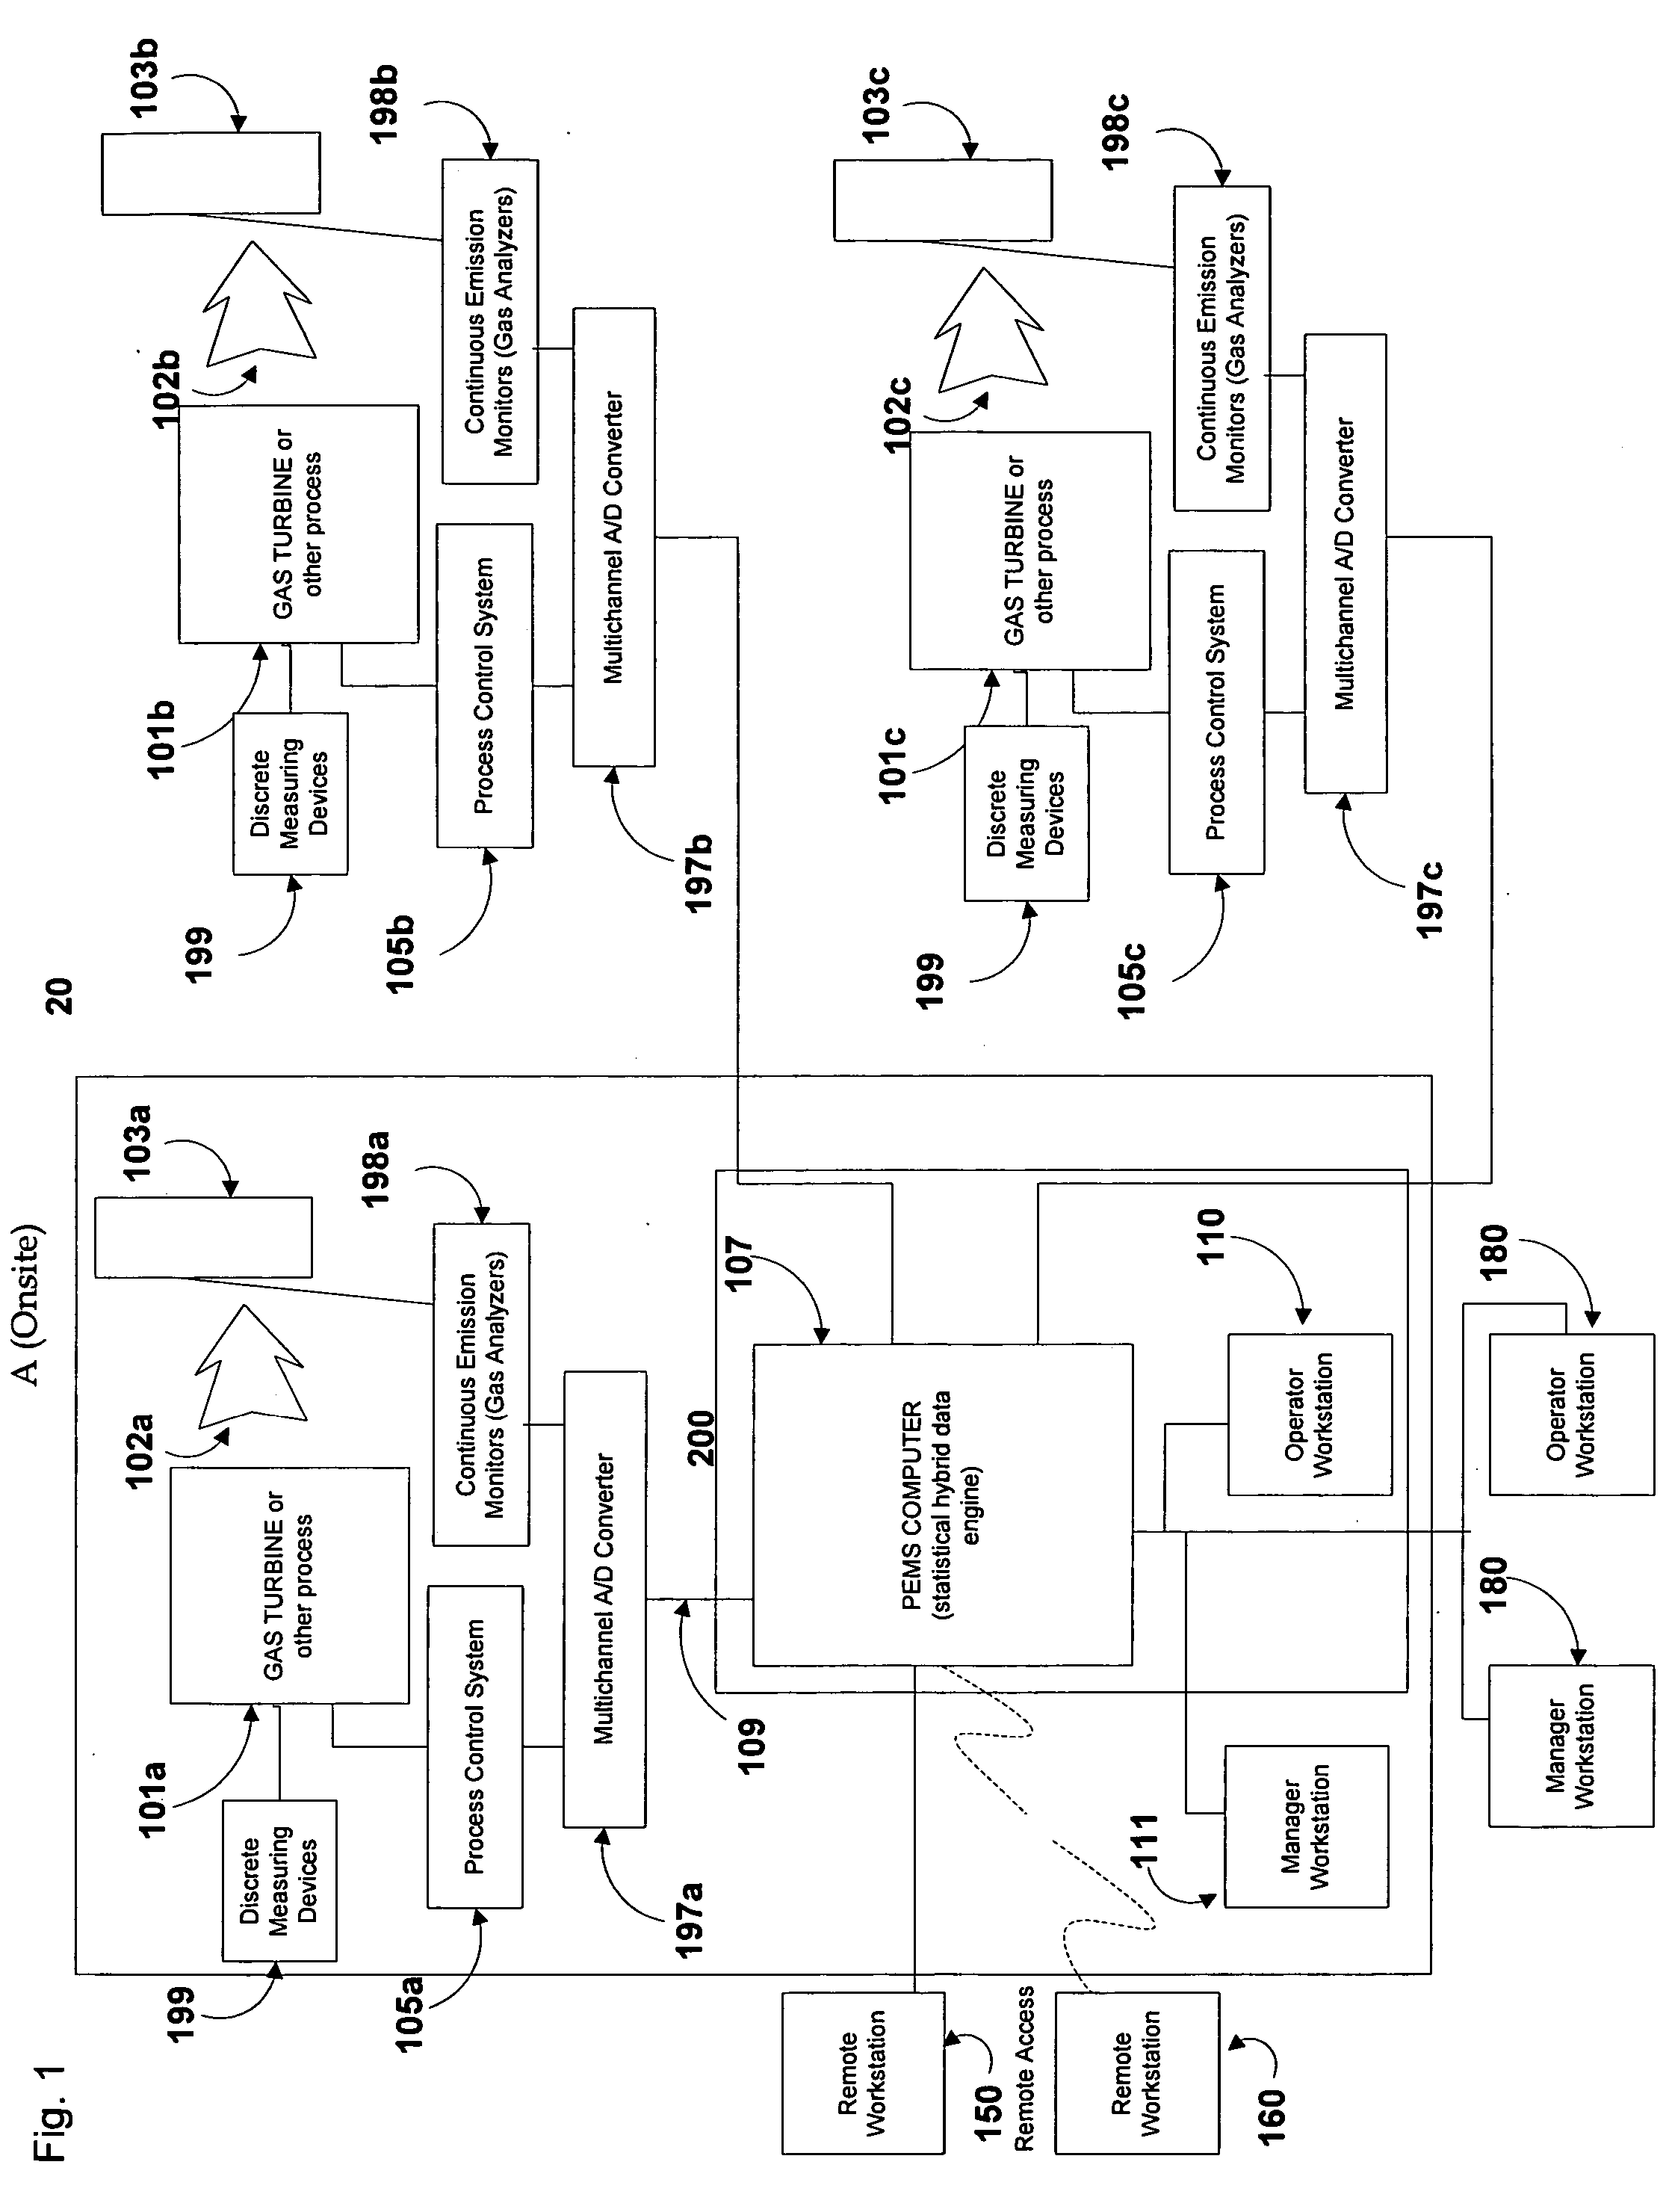 Predictive emissions monitoring system and method